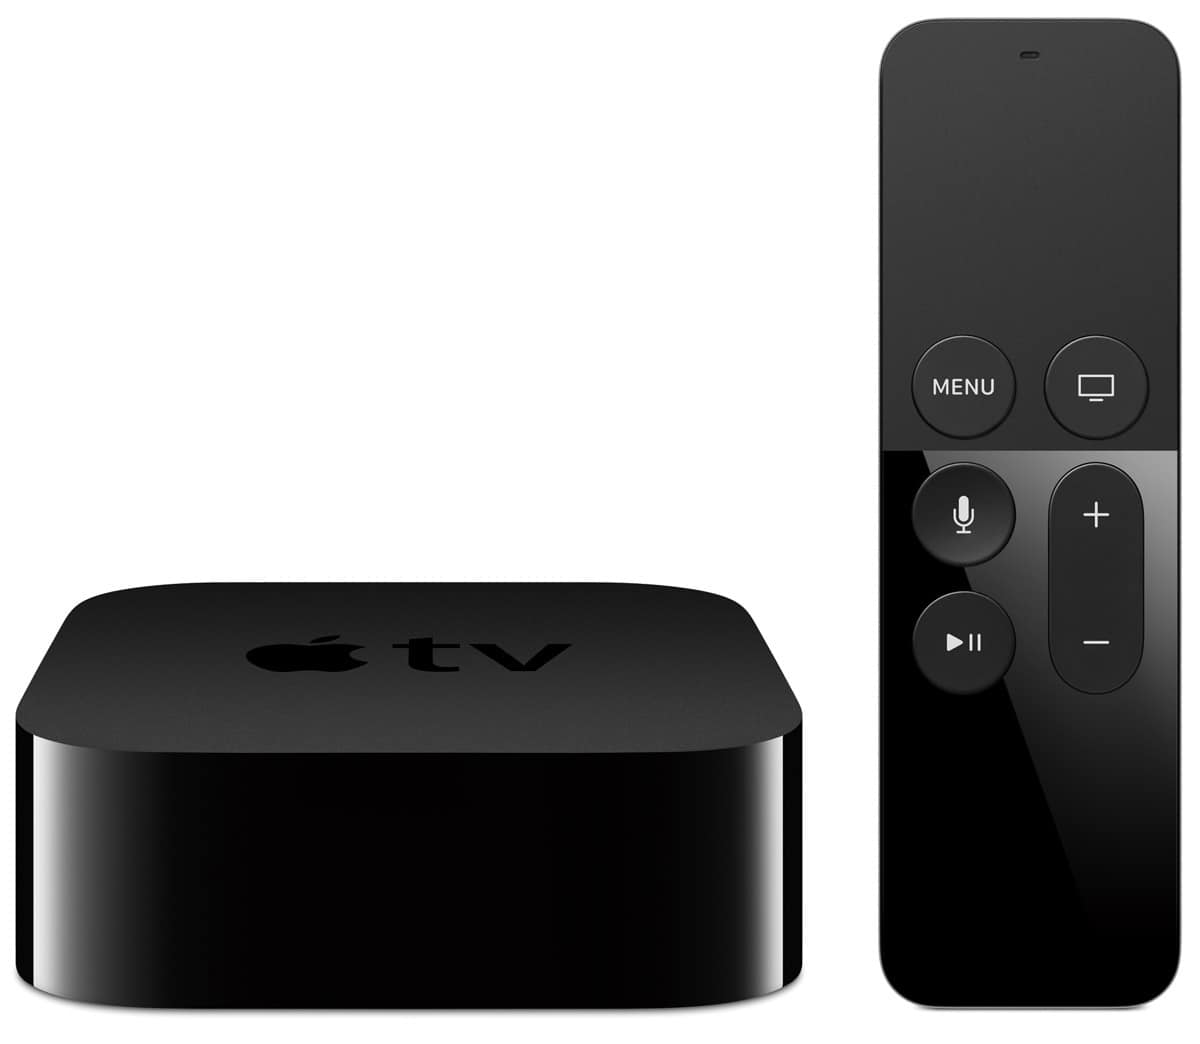 Tim Cook: ‘Think of Apple TV as a Foundation for Broader Business’